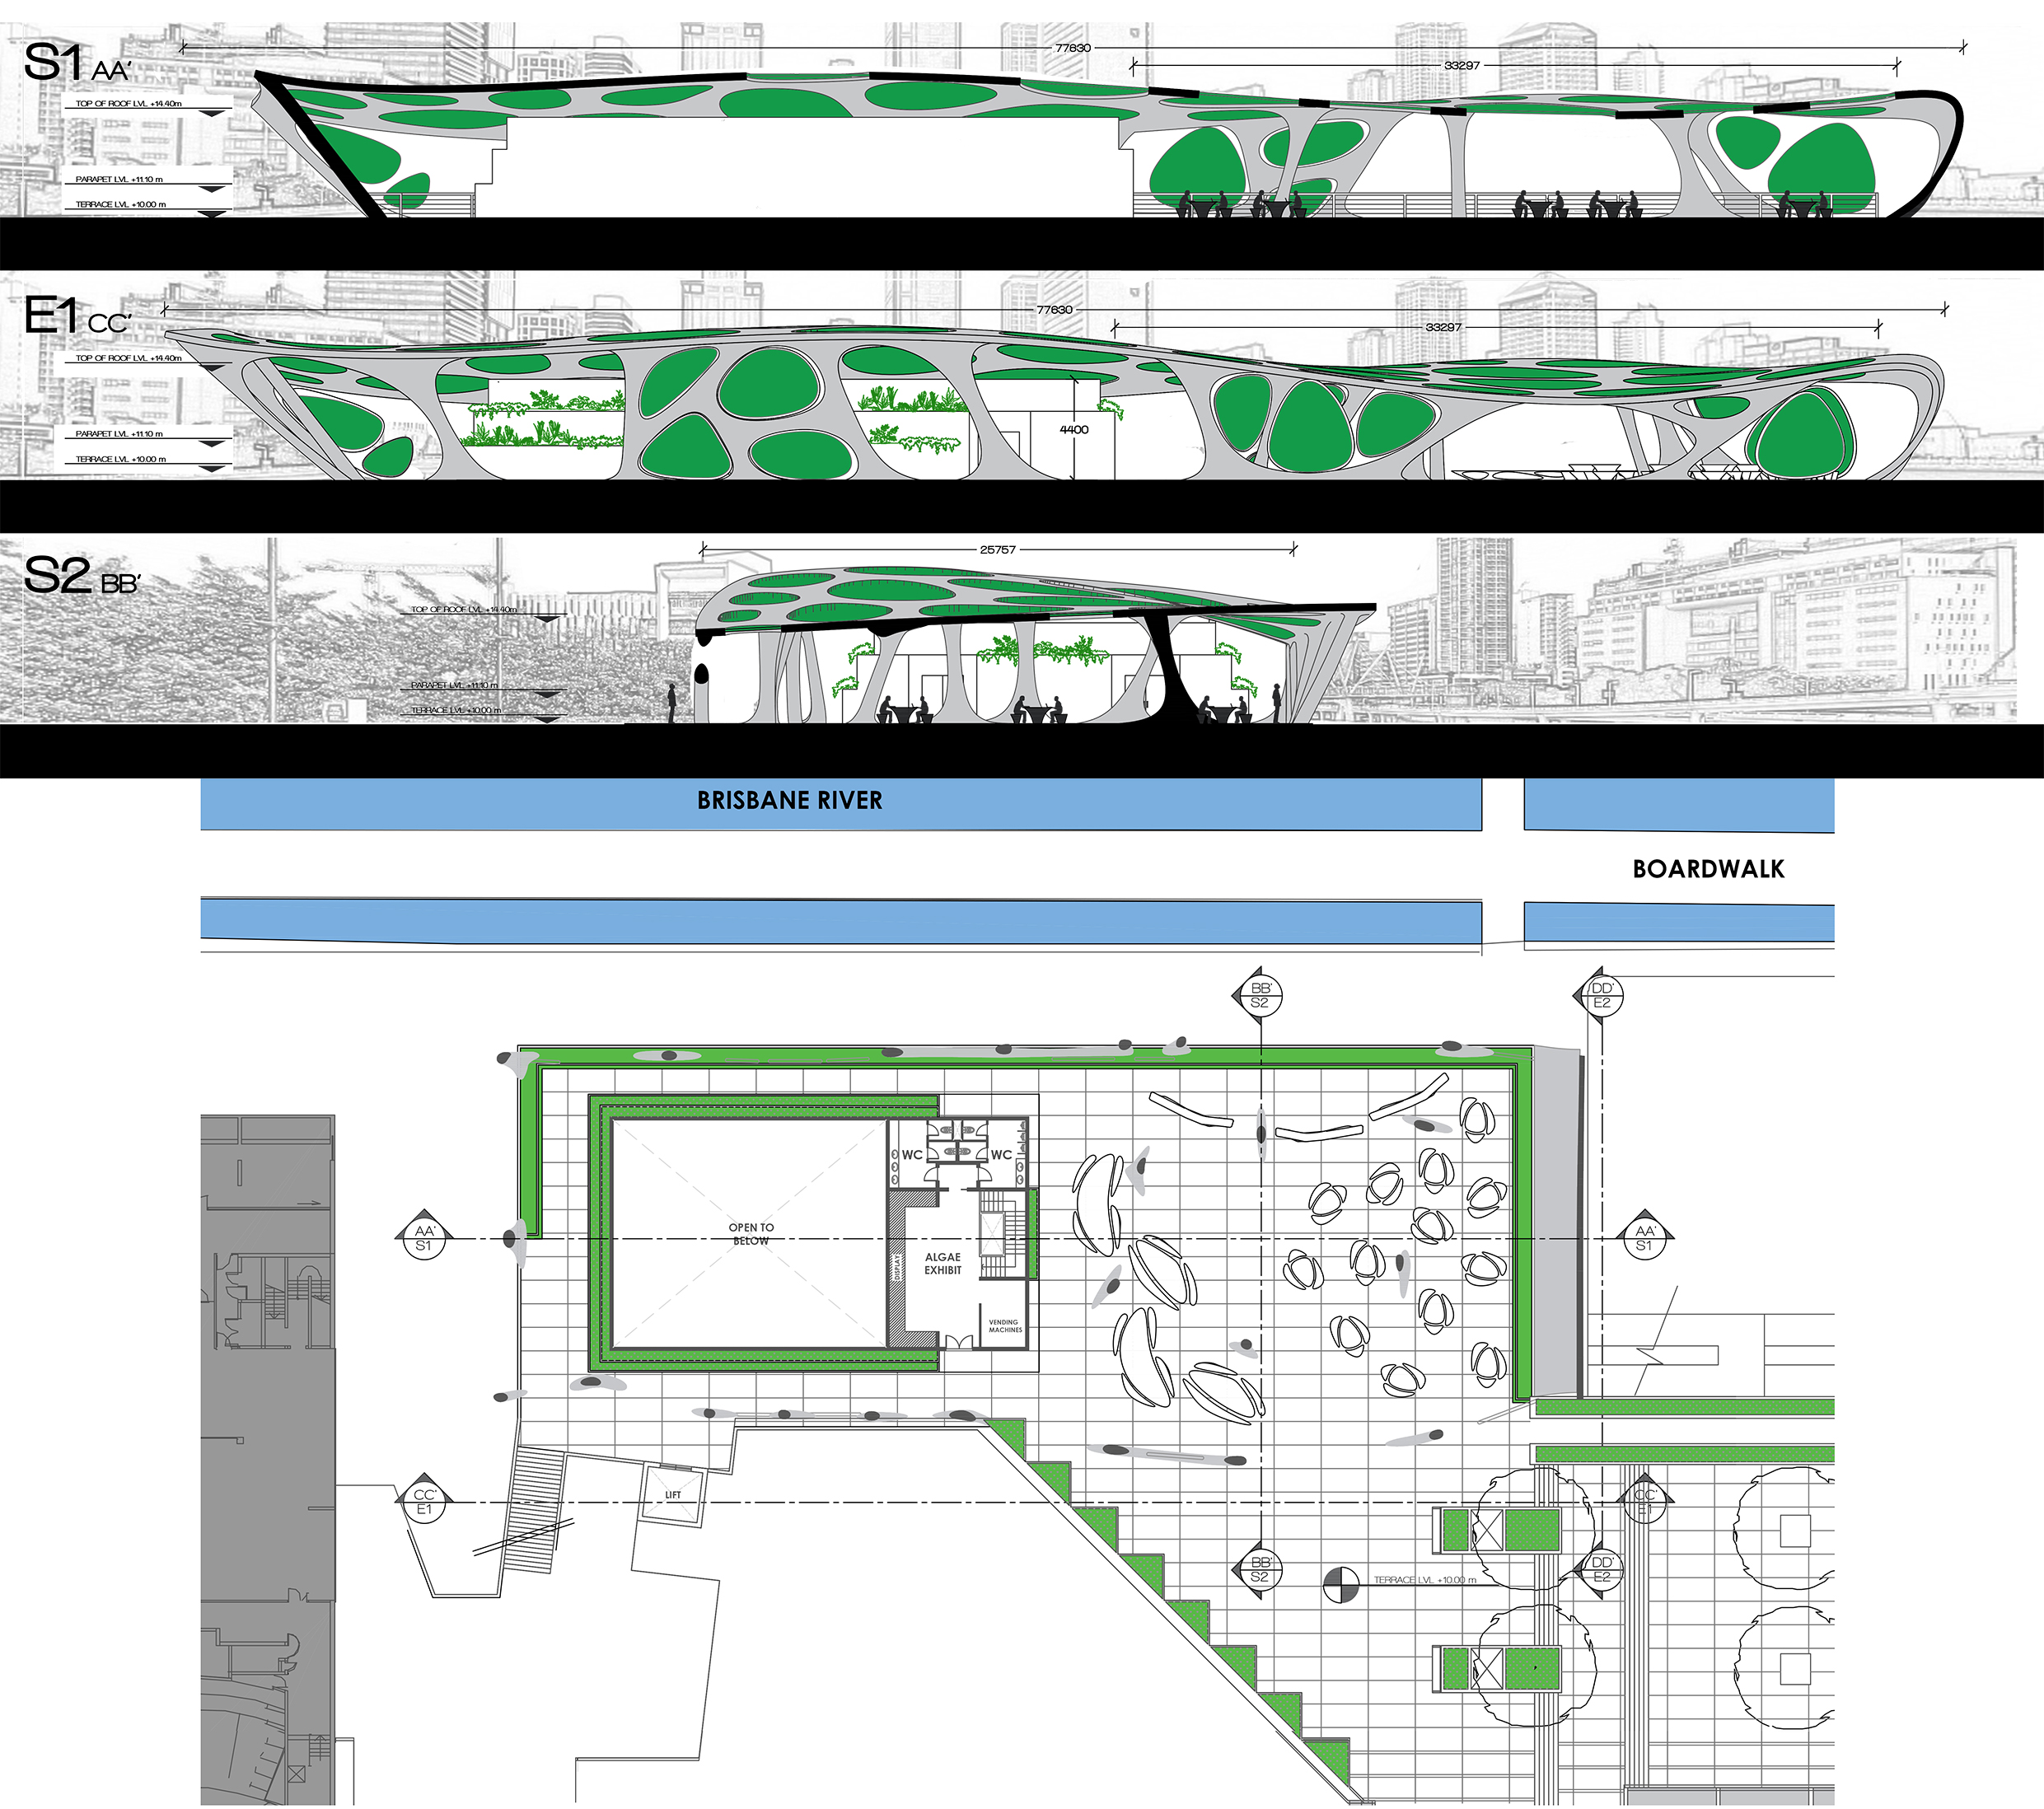 Plan view, sections, and elevations of the edge’s rooftop terrace with the addition of the algae PBRs.